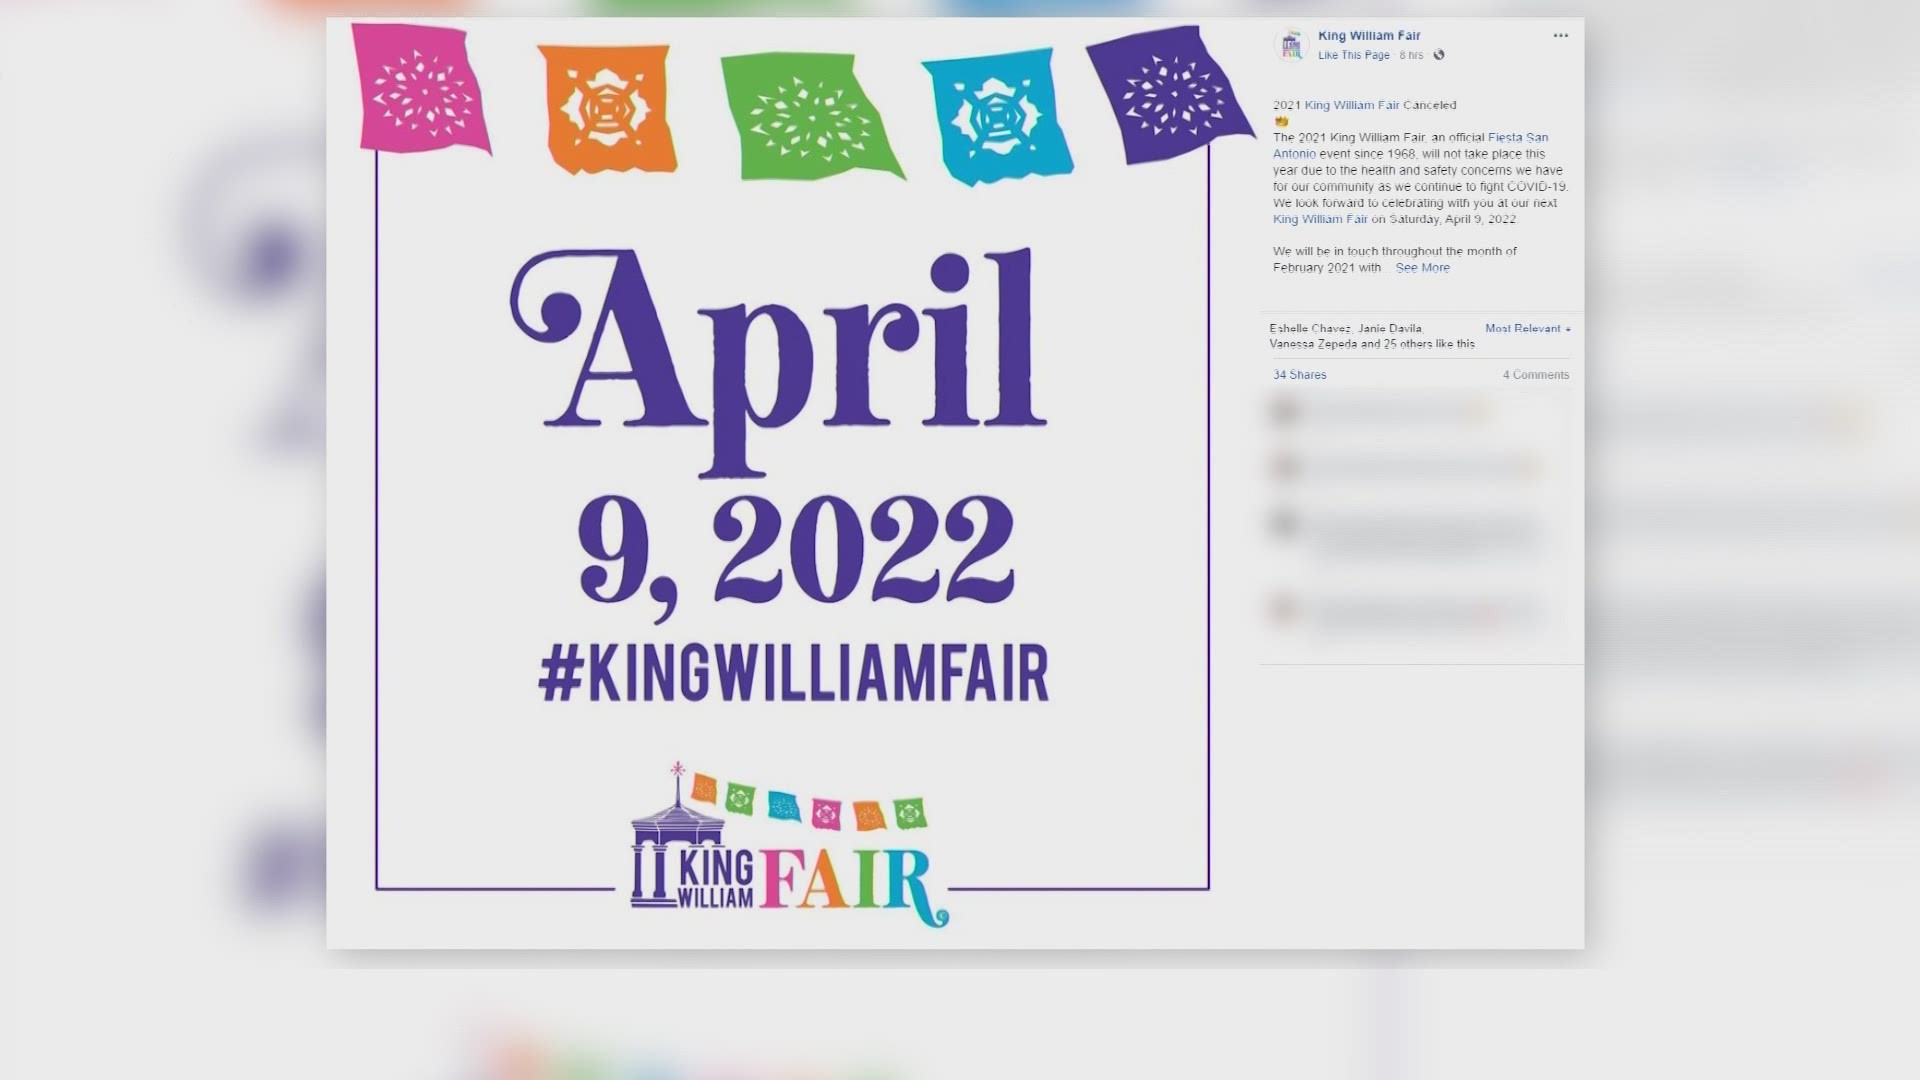 The 2021 King William Fair has been canceled, according to the page's Facebook post. The announcement comes after Fiesta was postponed from spring until summer.